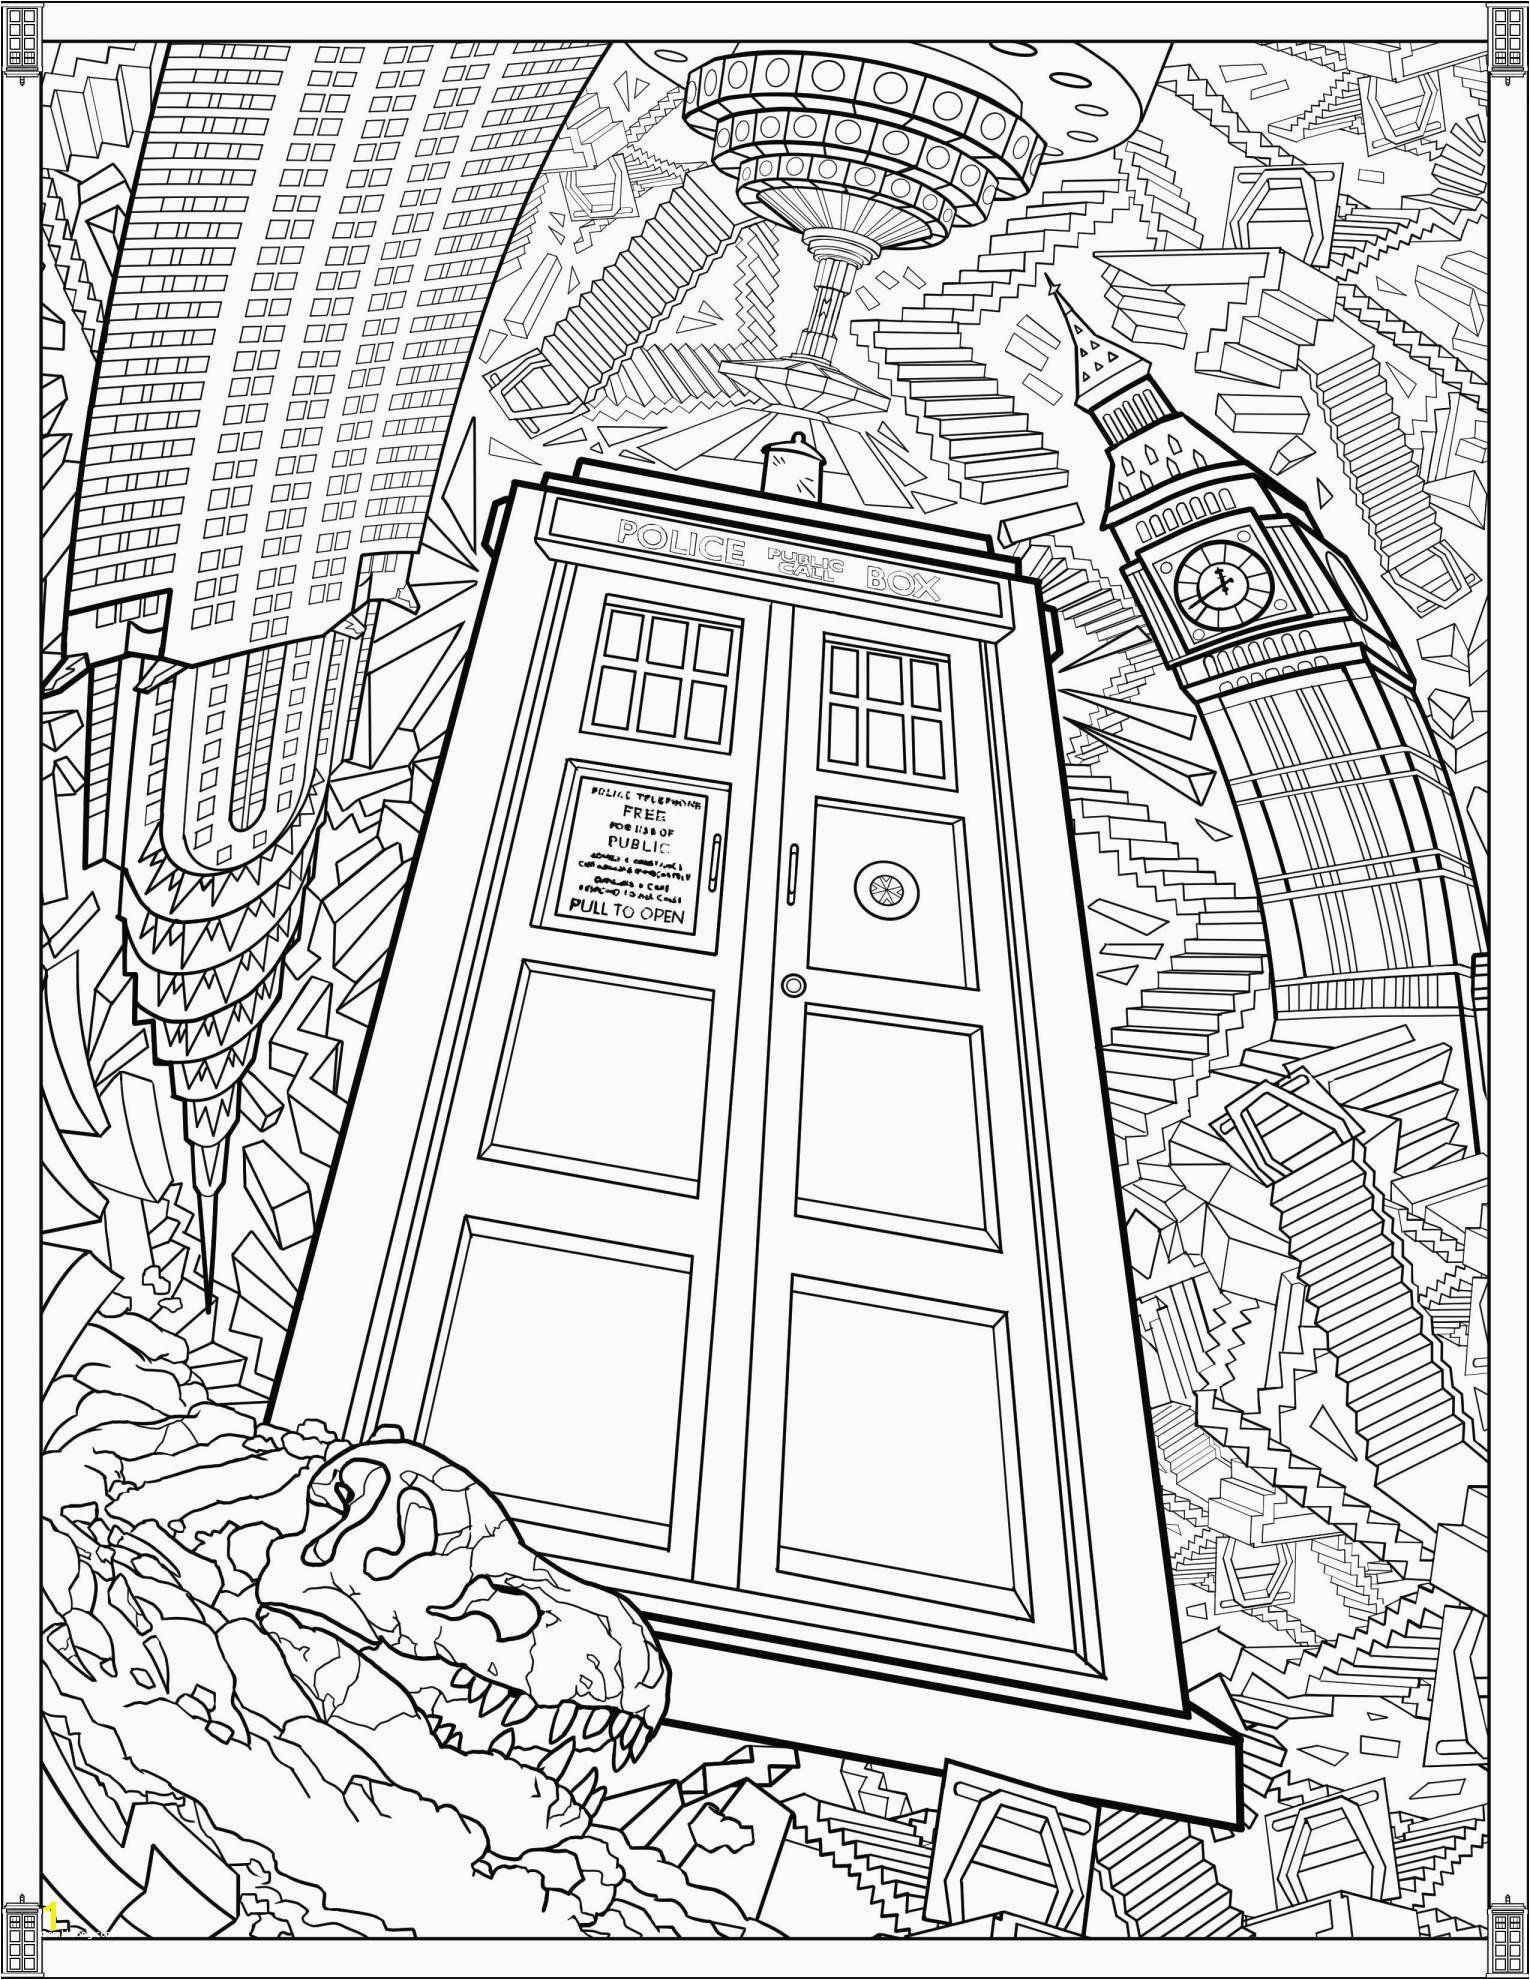 Coloring Pages for Queen Esther Coloring Pages Coloring Pages for Adults with Numbers